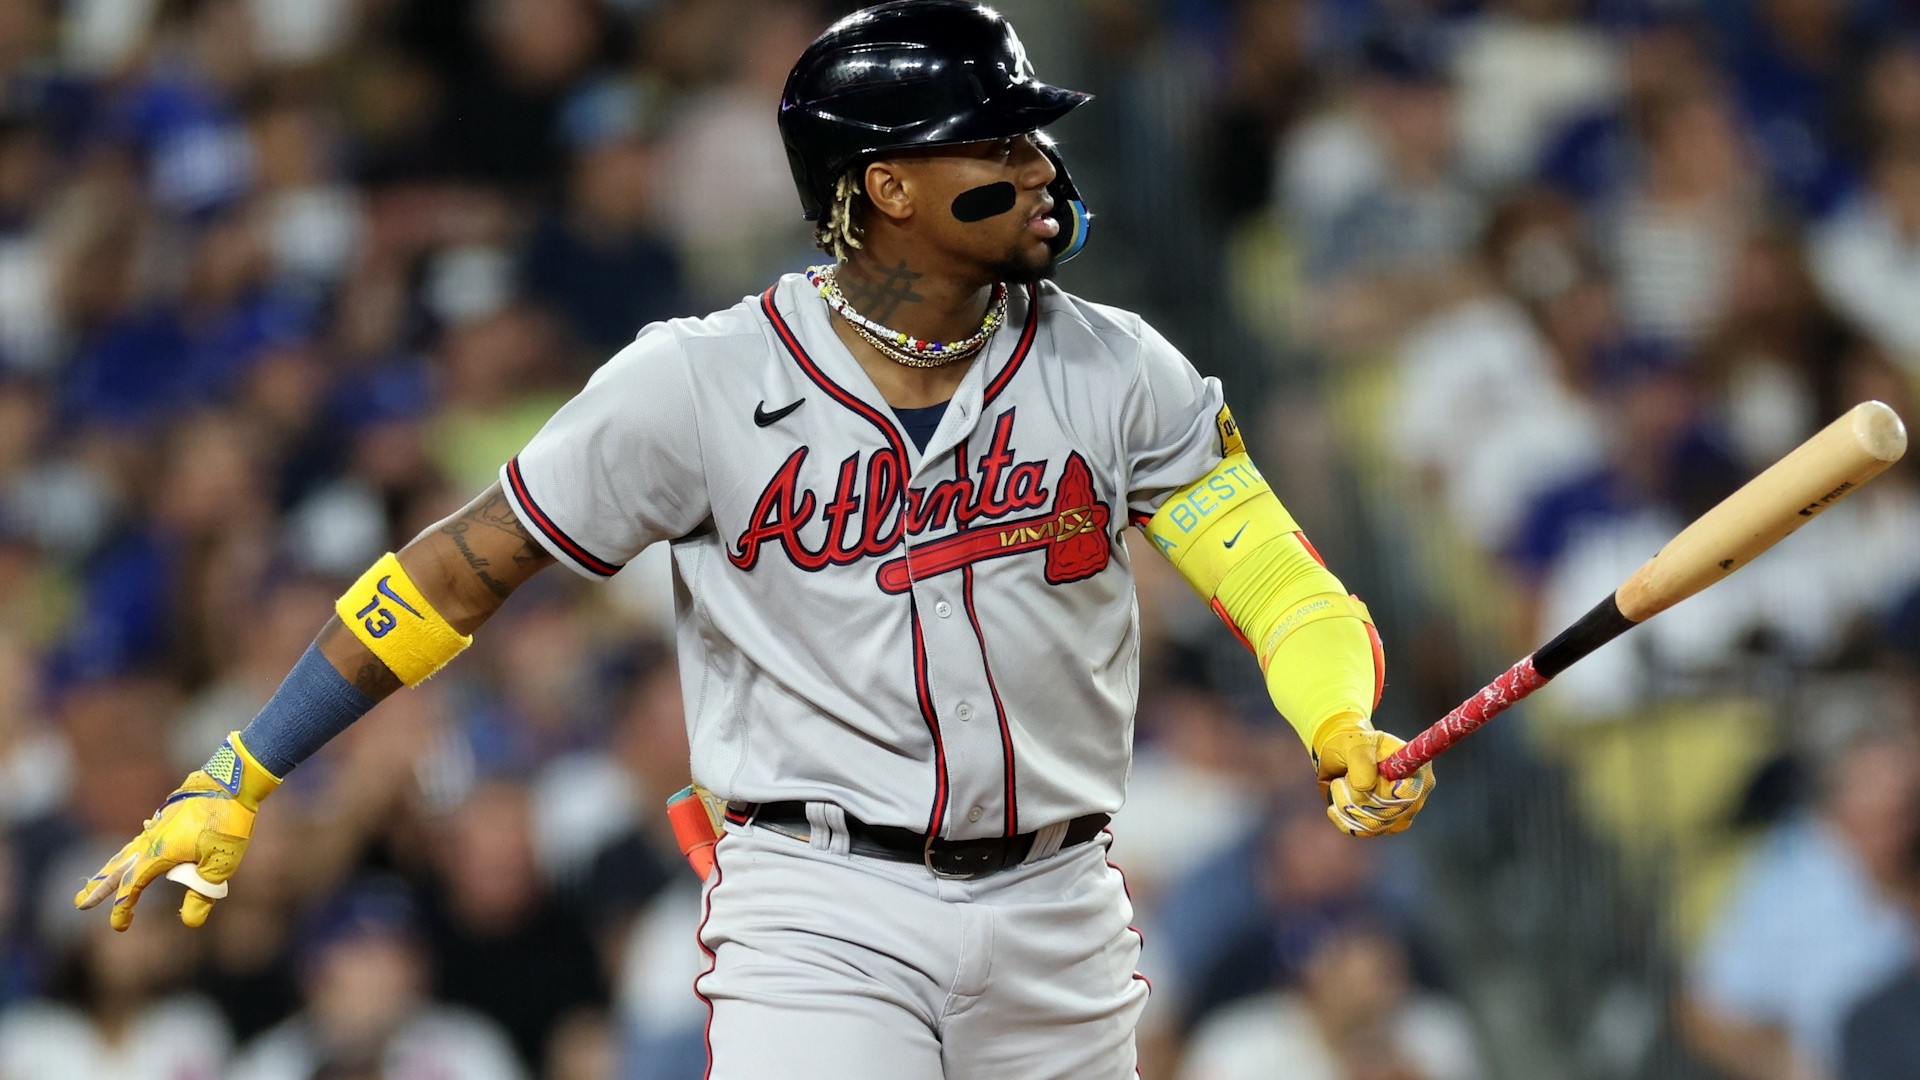 Ronald Acuña Jr. named MLB Network's best player in baseball